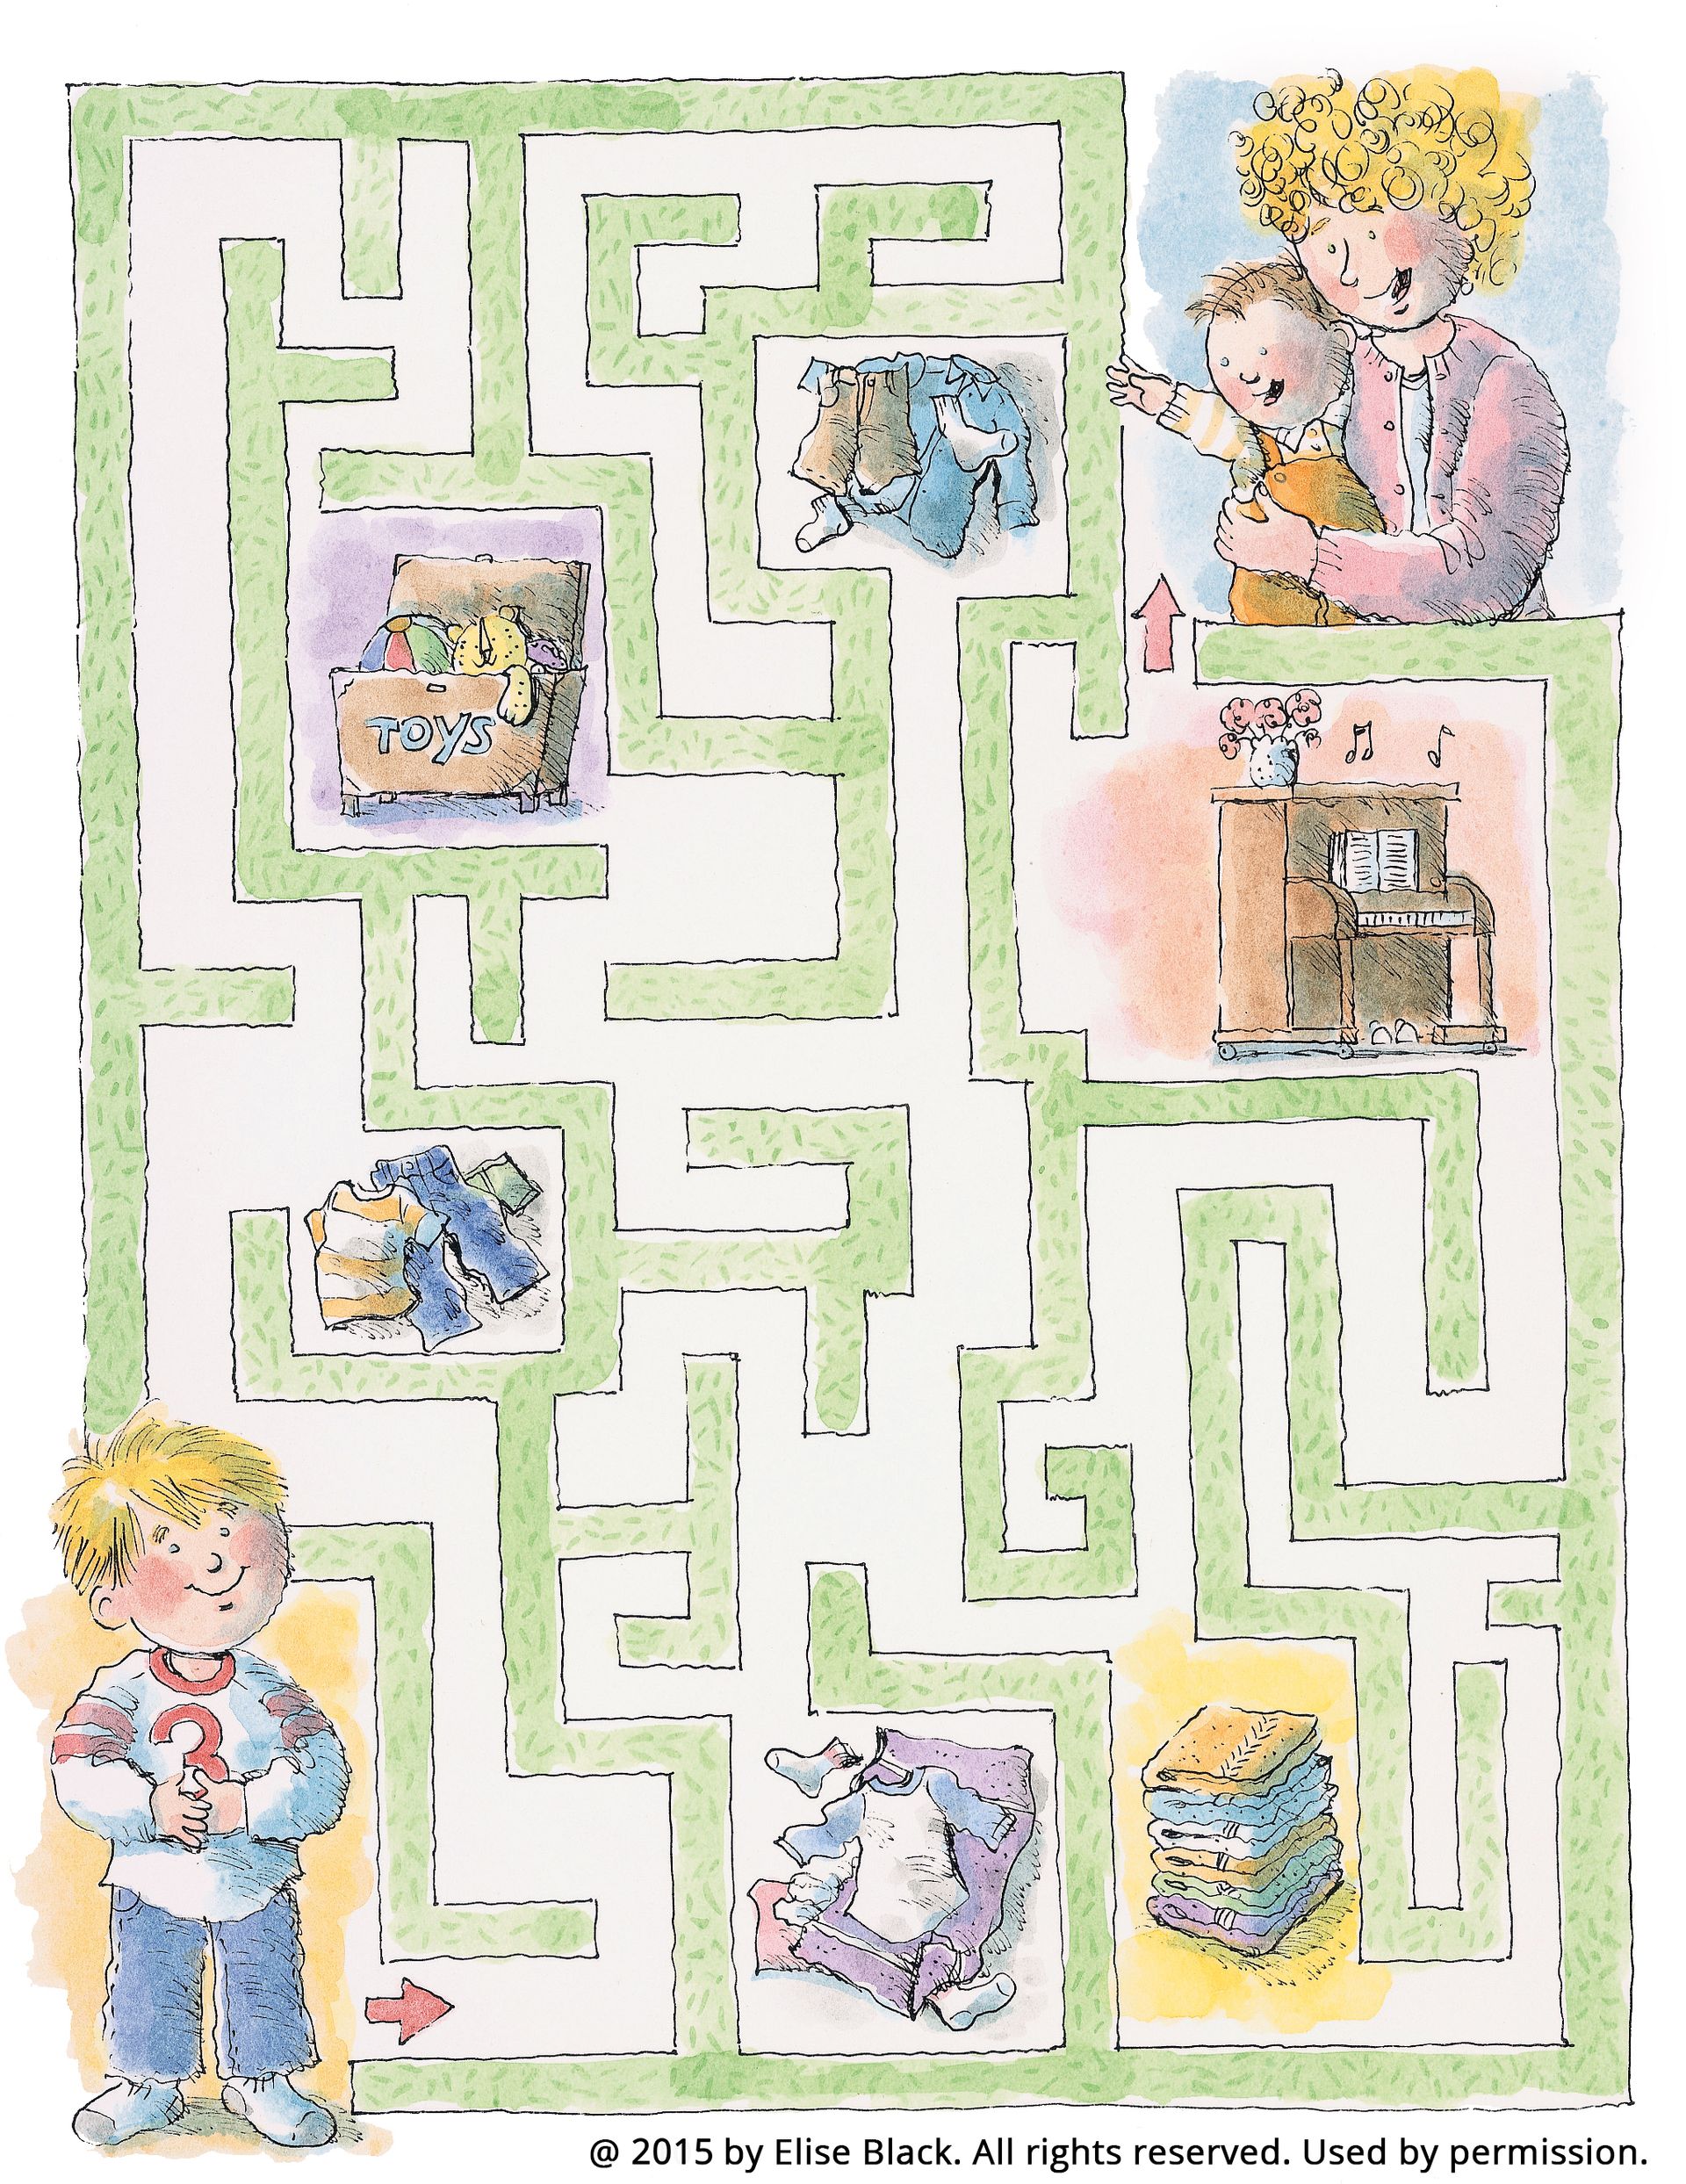 A maze with a boy going around household objects to his mom and little brother.